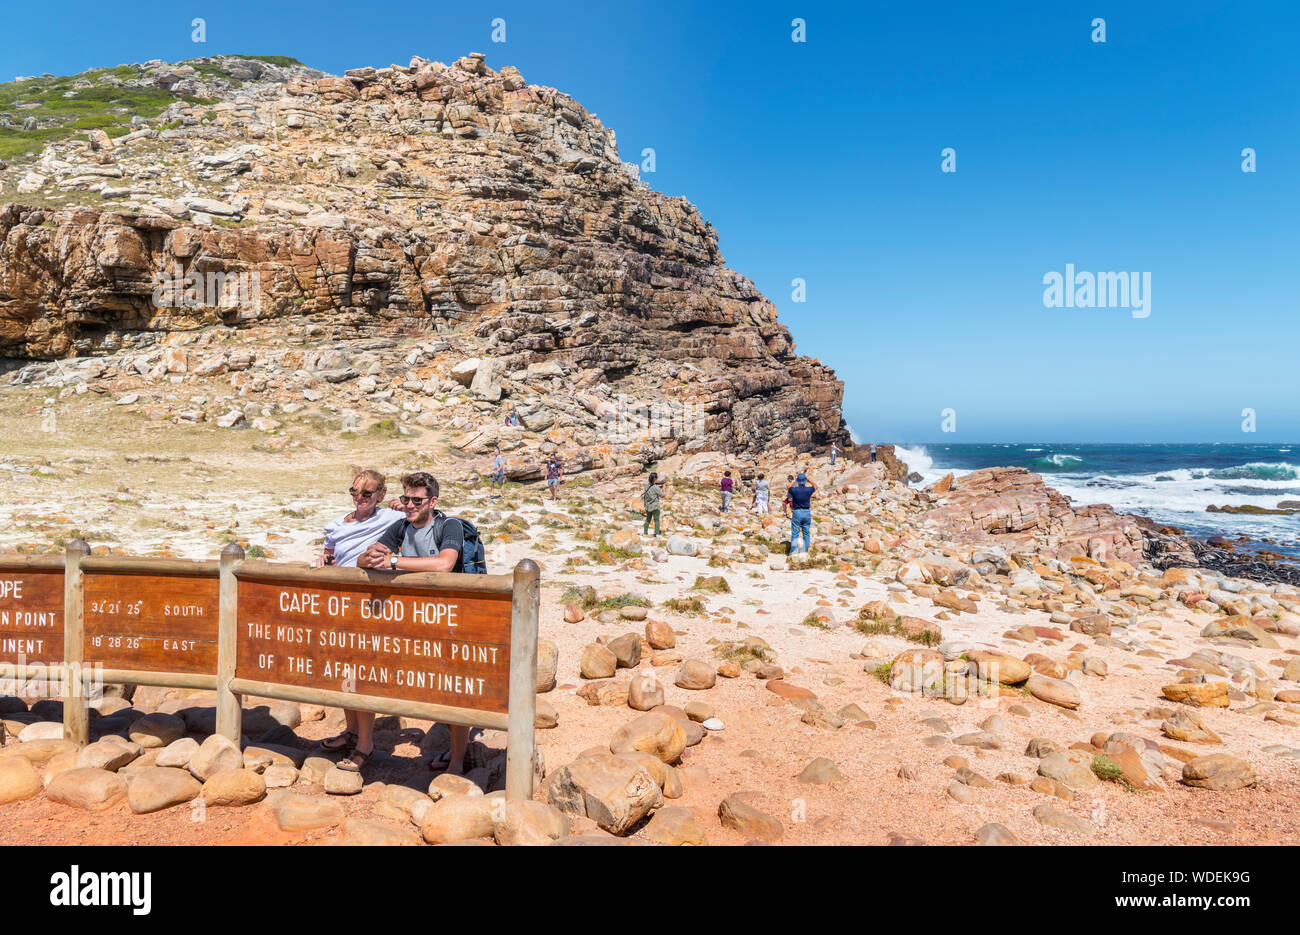 Couple posing for a photo by the sign at the Cape of Good Hope, the most south western point on the African continent, Western Cape, South Africa Stock Photo